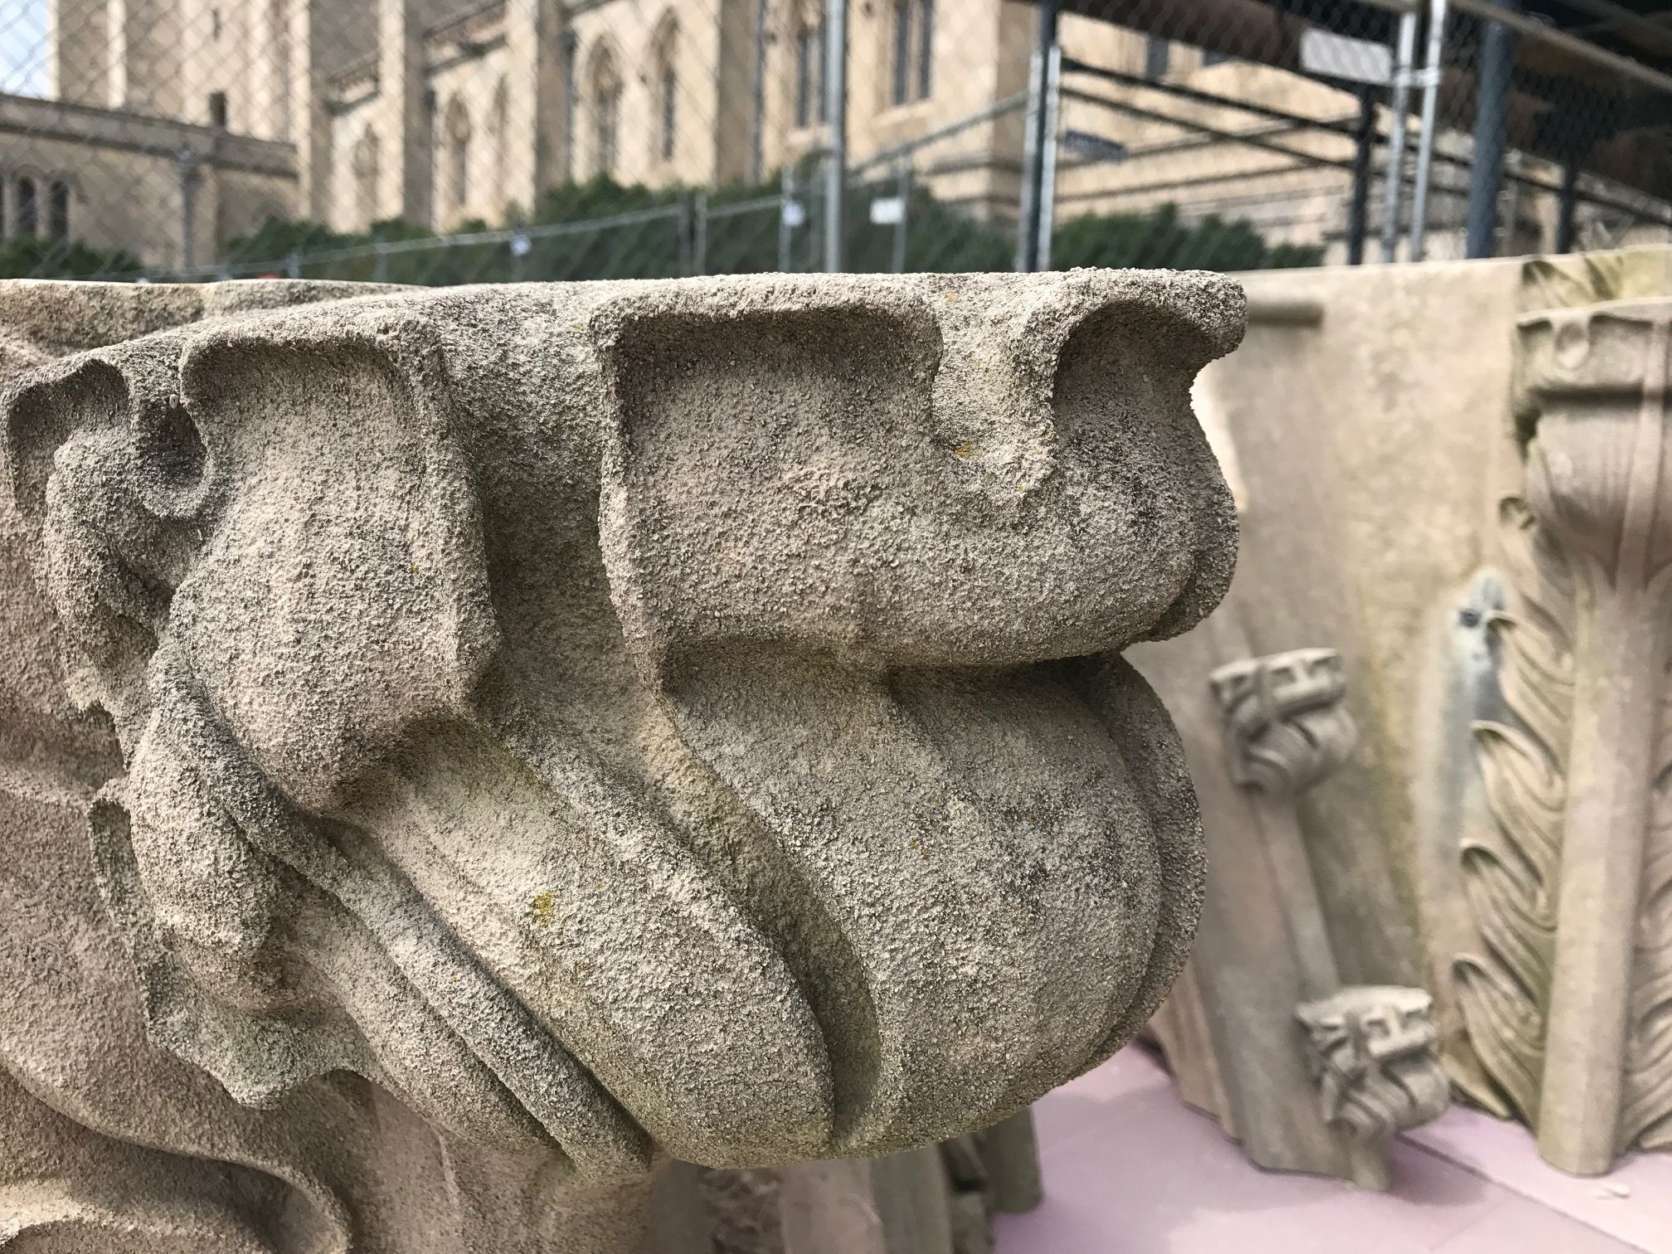 The stone twisted during the earthquake damaging many corners of the stone carvings, said National Cathedral stone carver Sean Callahan. (WTOP/Megan Cloherty)